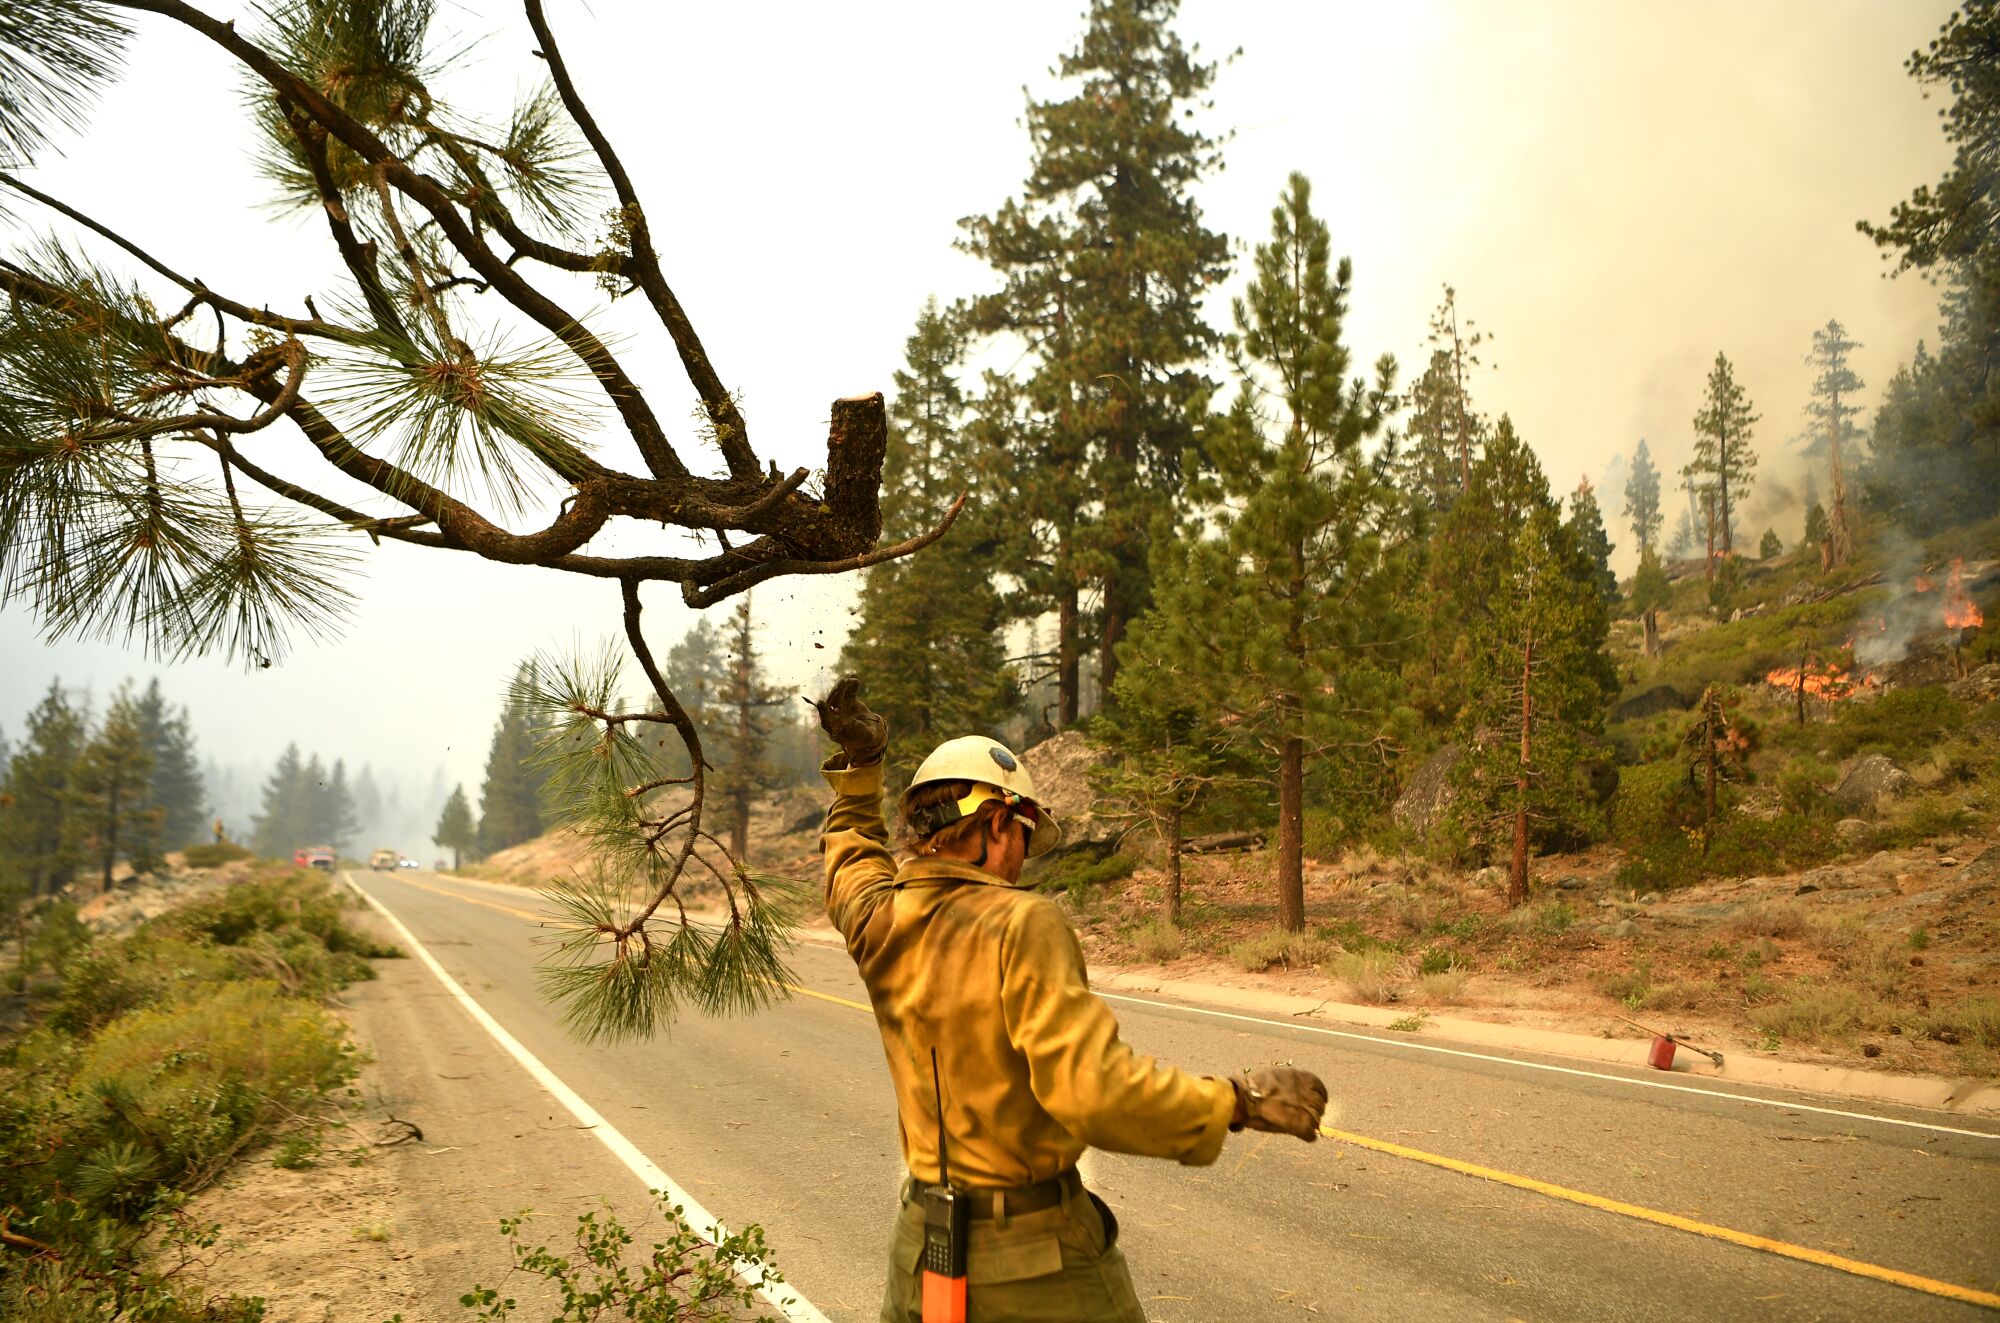 A firefighter on the side of a road